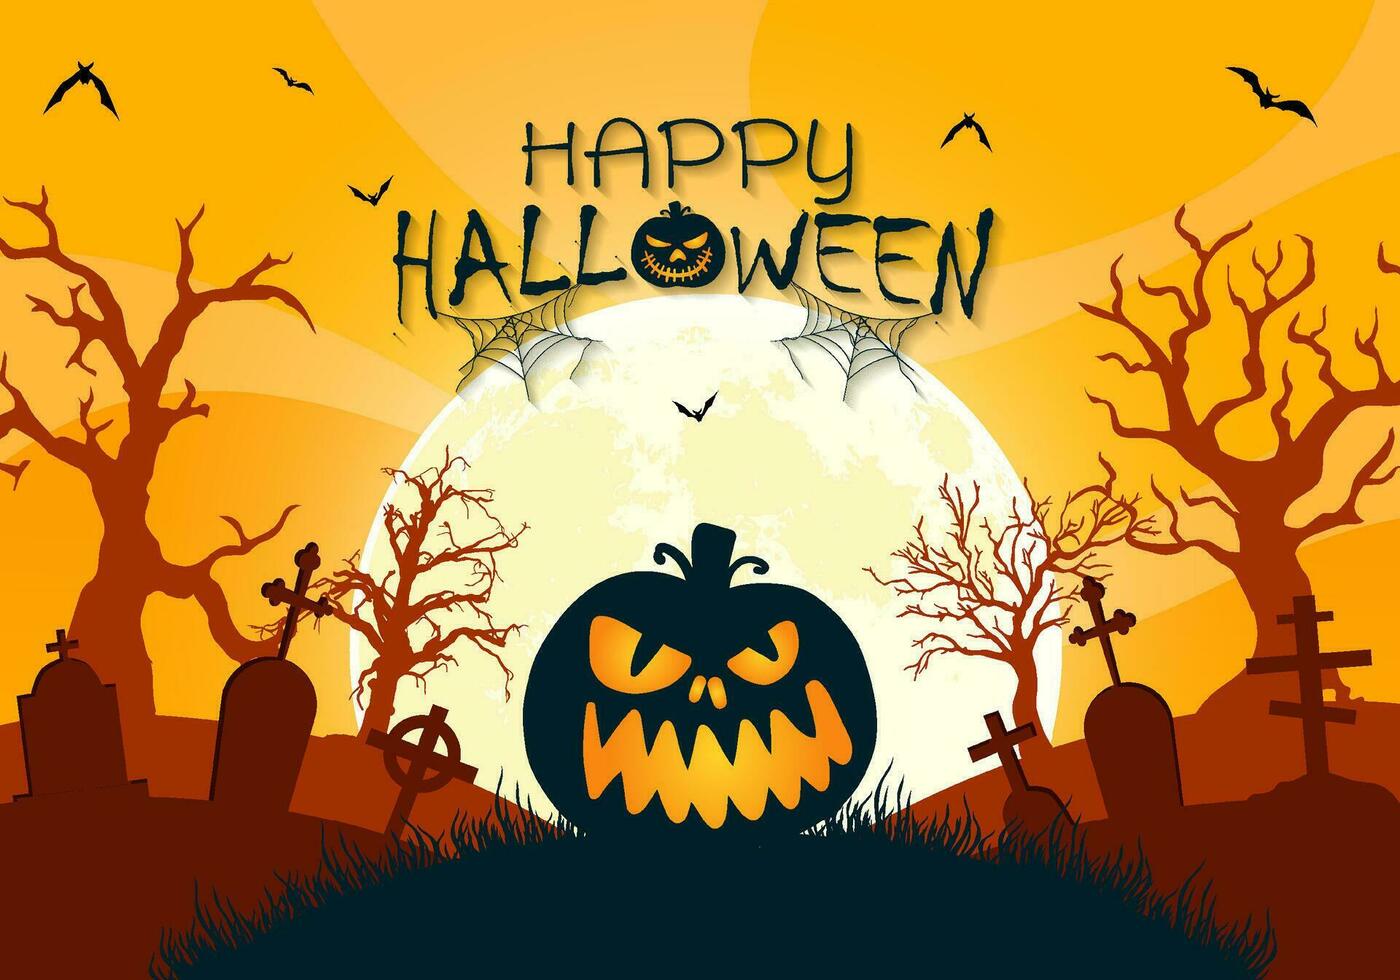 Orange Background of halloween with creepy tree and scary pumpkins against a full moon vector